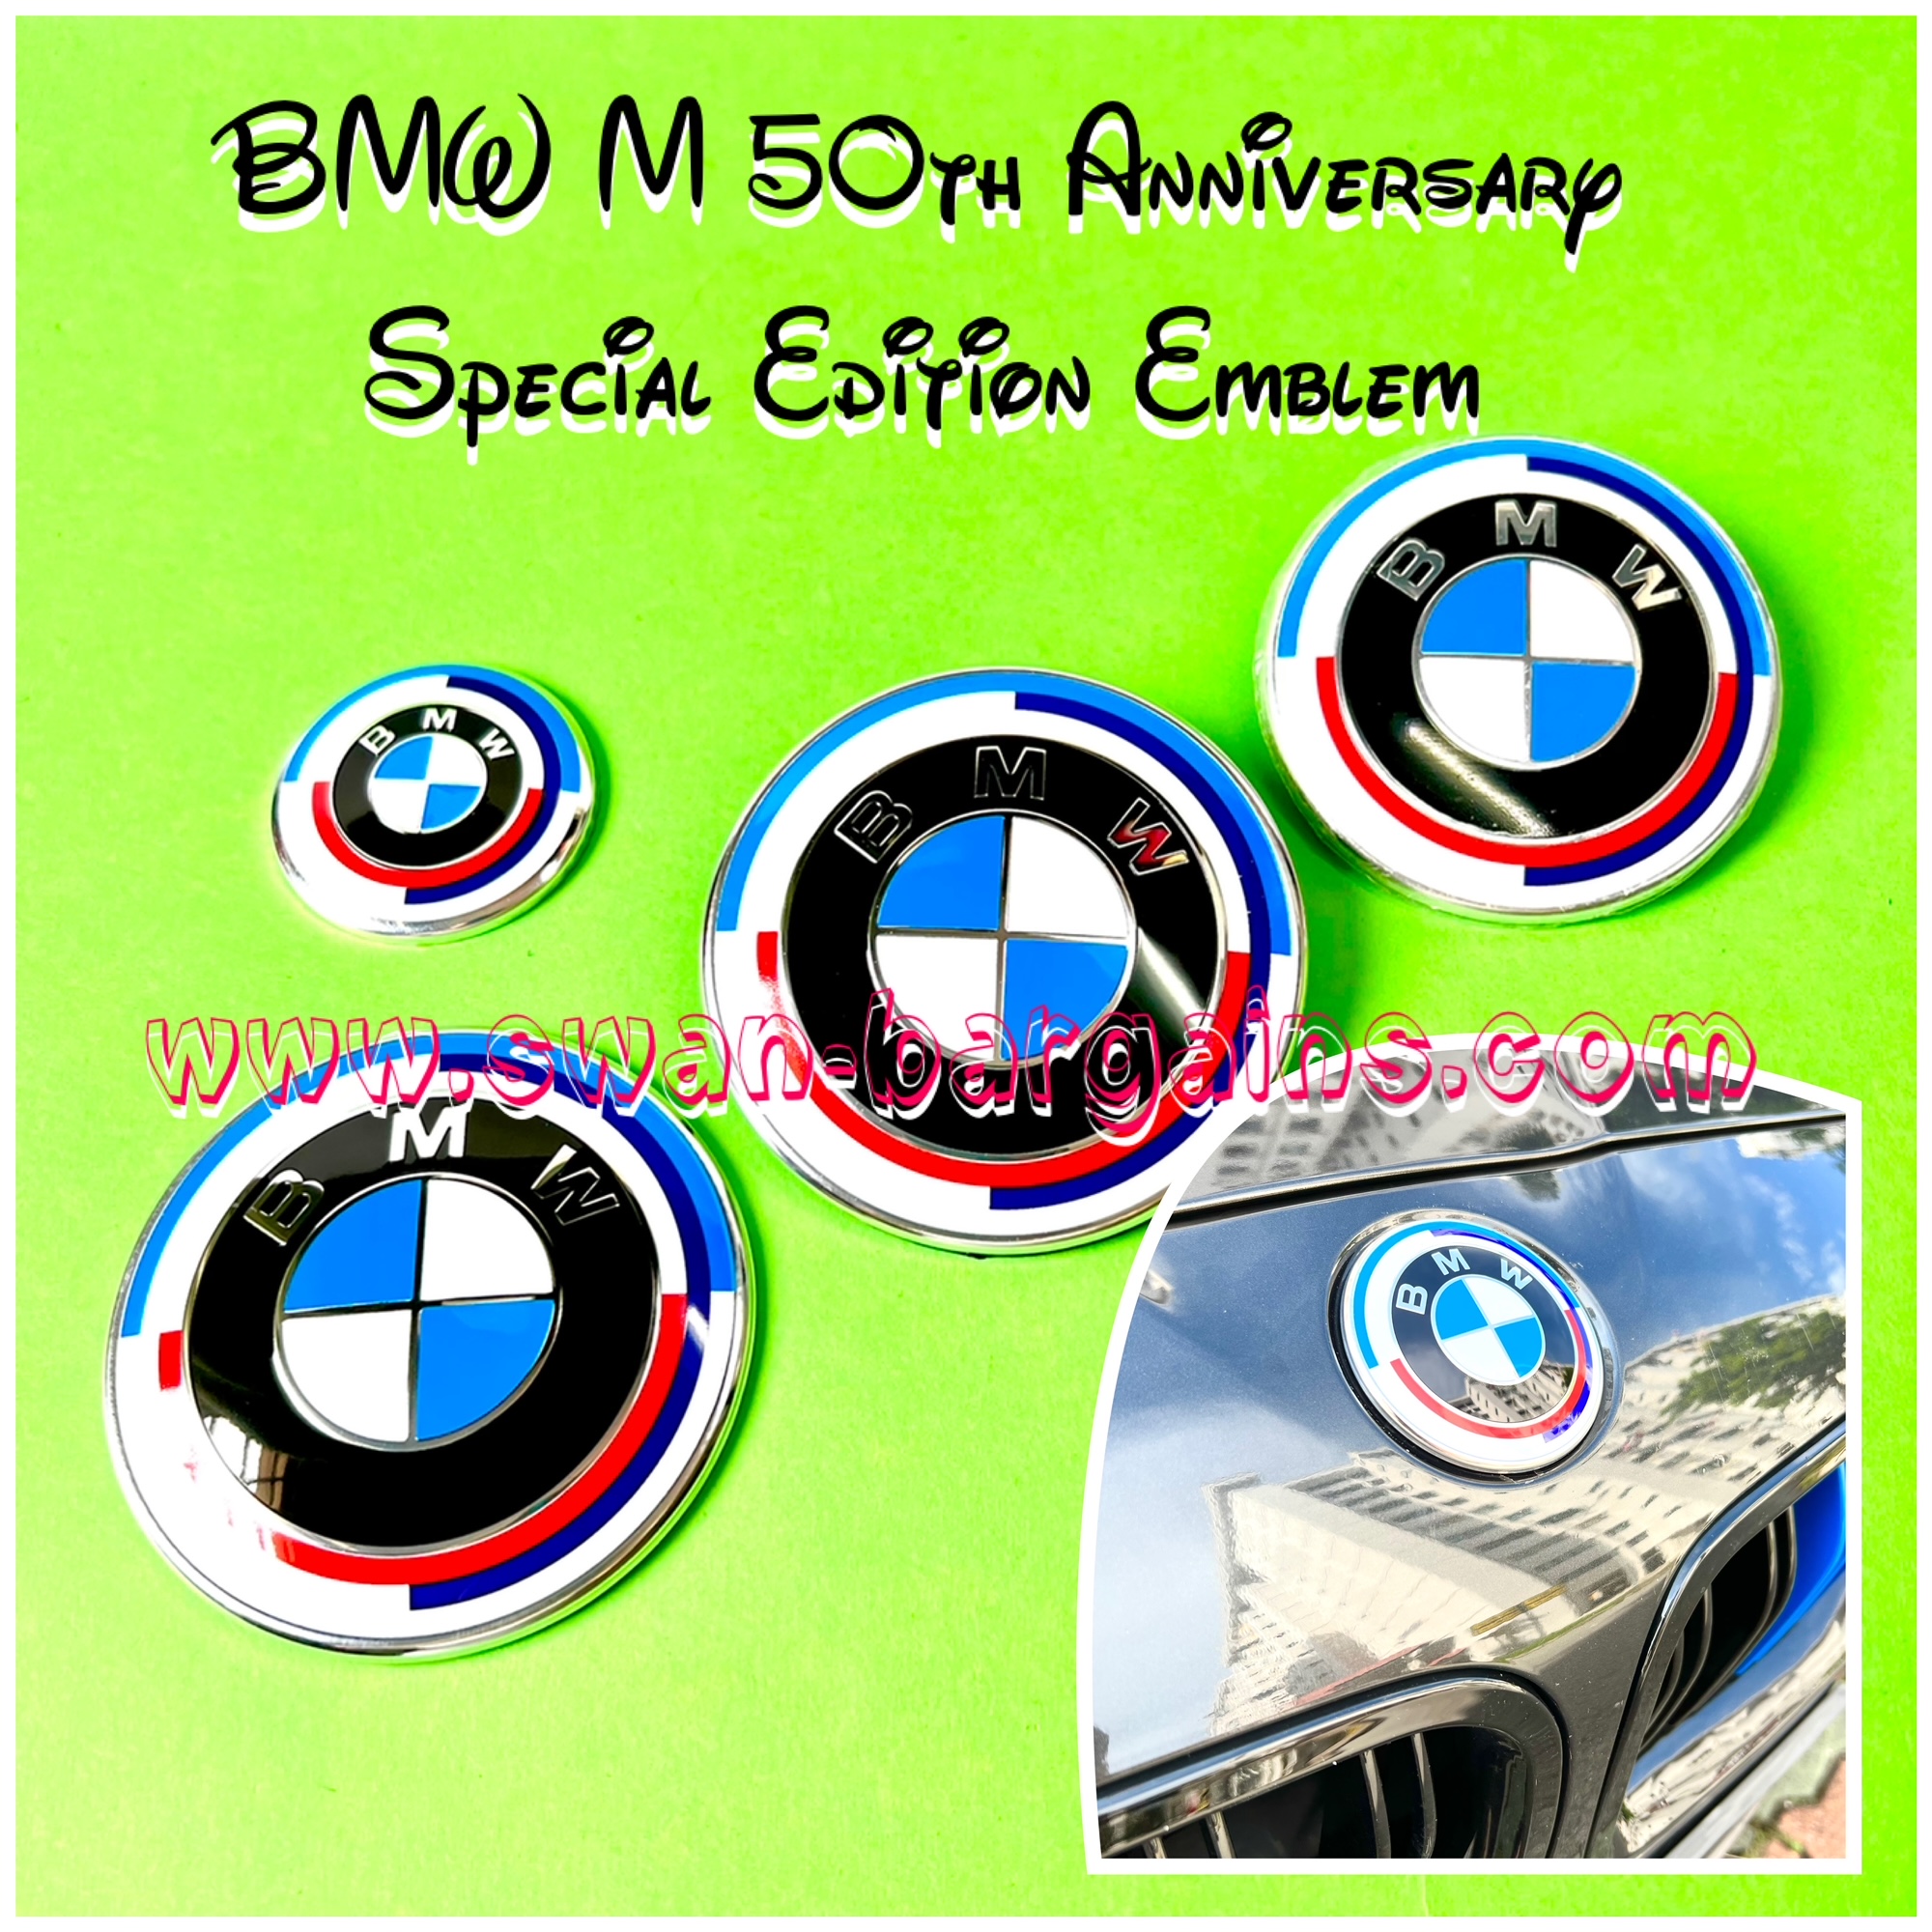 BMW M 50th Anniversary Special Edition Emblem – Welcome to Swan